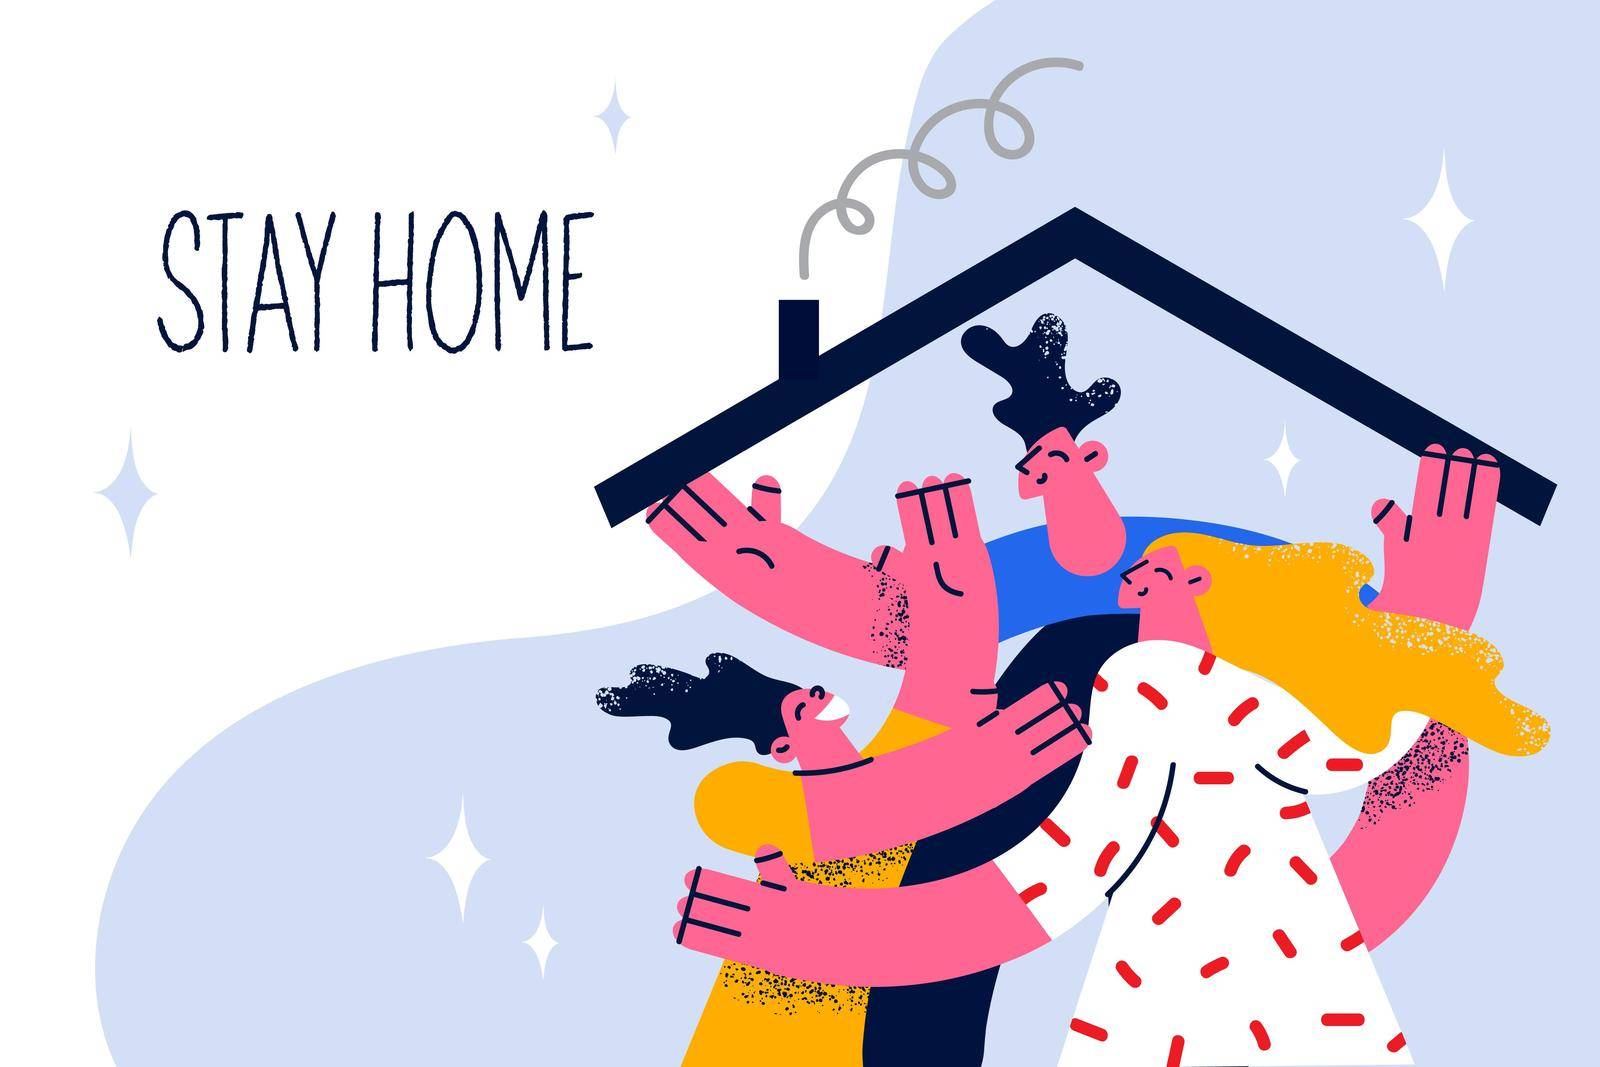 Stay at home during pandemic concept. Young smiling family with child hugging staying at home under roof during covid-19 epidemic together with lettering vector illustration